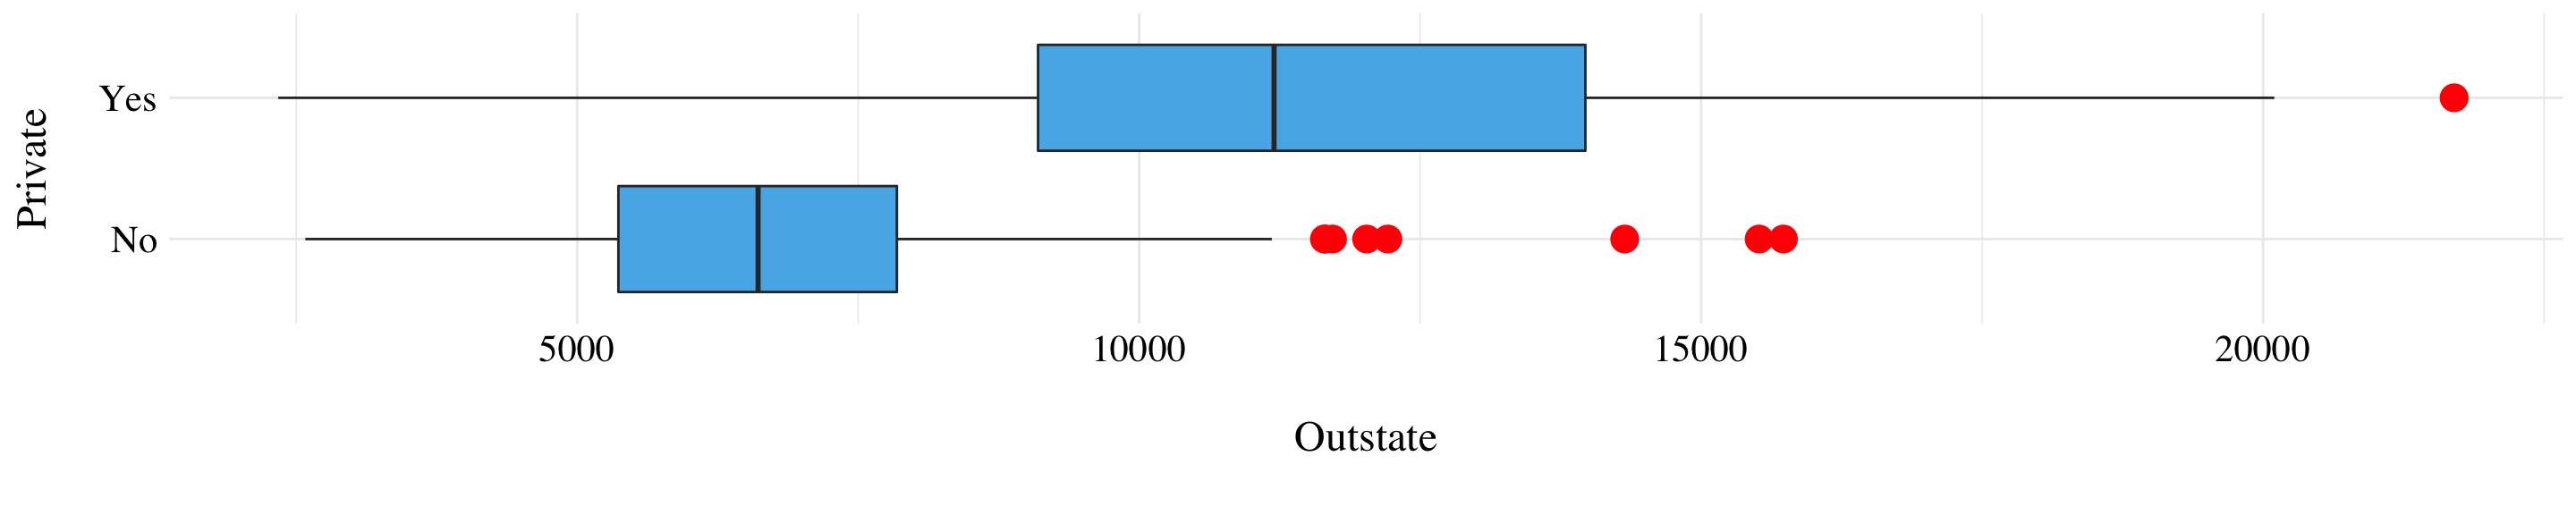 Boxplots of the variable Outstate by Private.